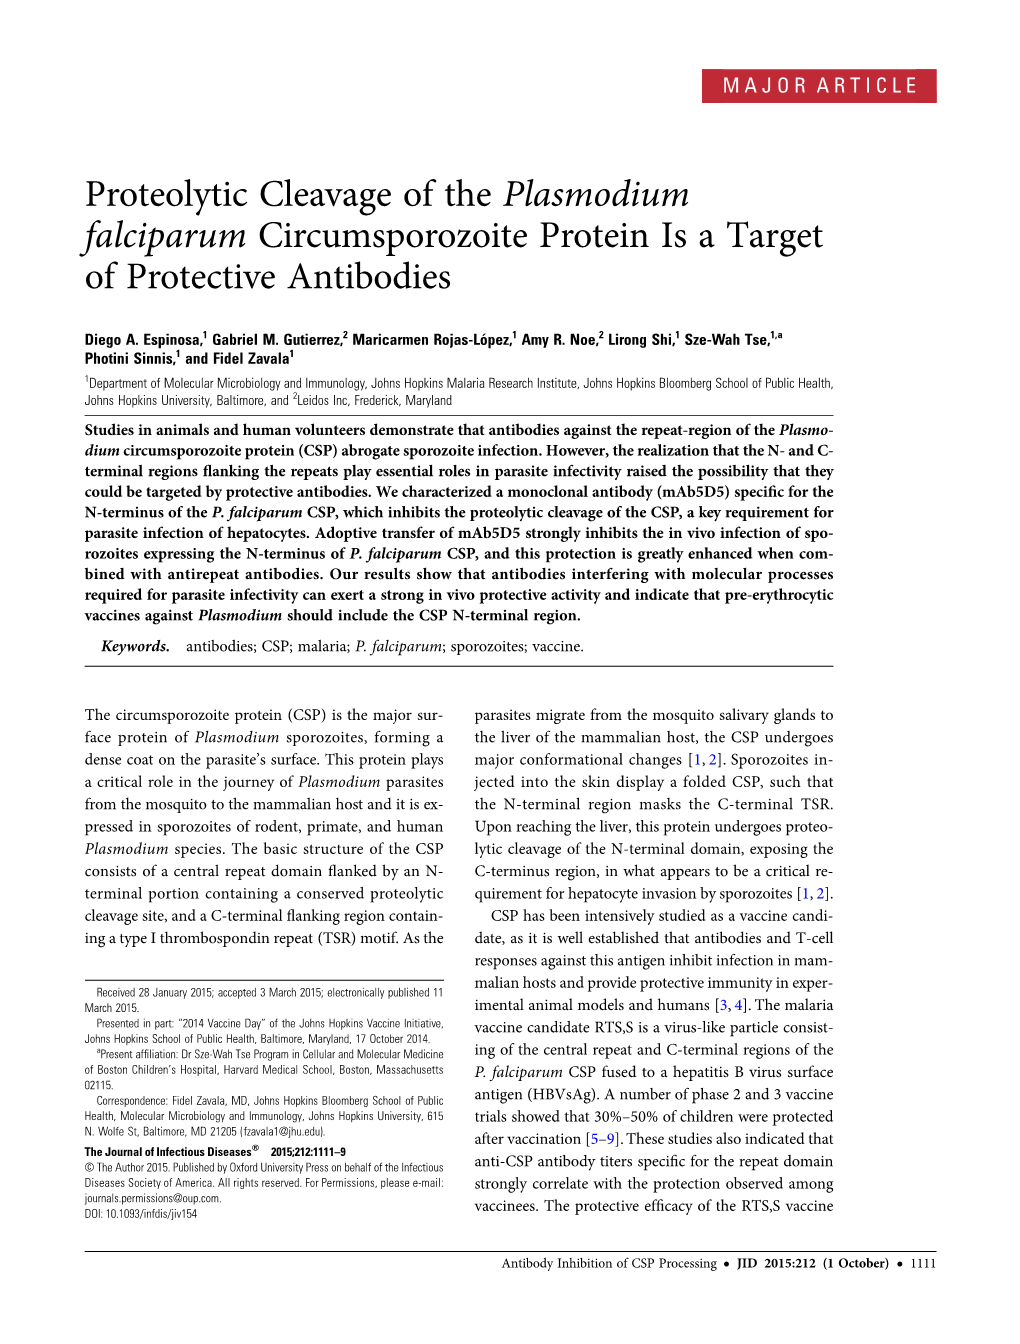 Proteolytic Cleavage of the Plasmodium Falciparum Circumsporozoite Protein Is a Target of Protective Antibodies